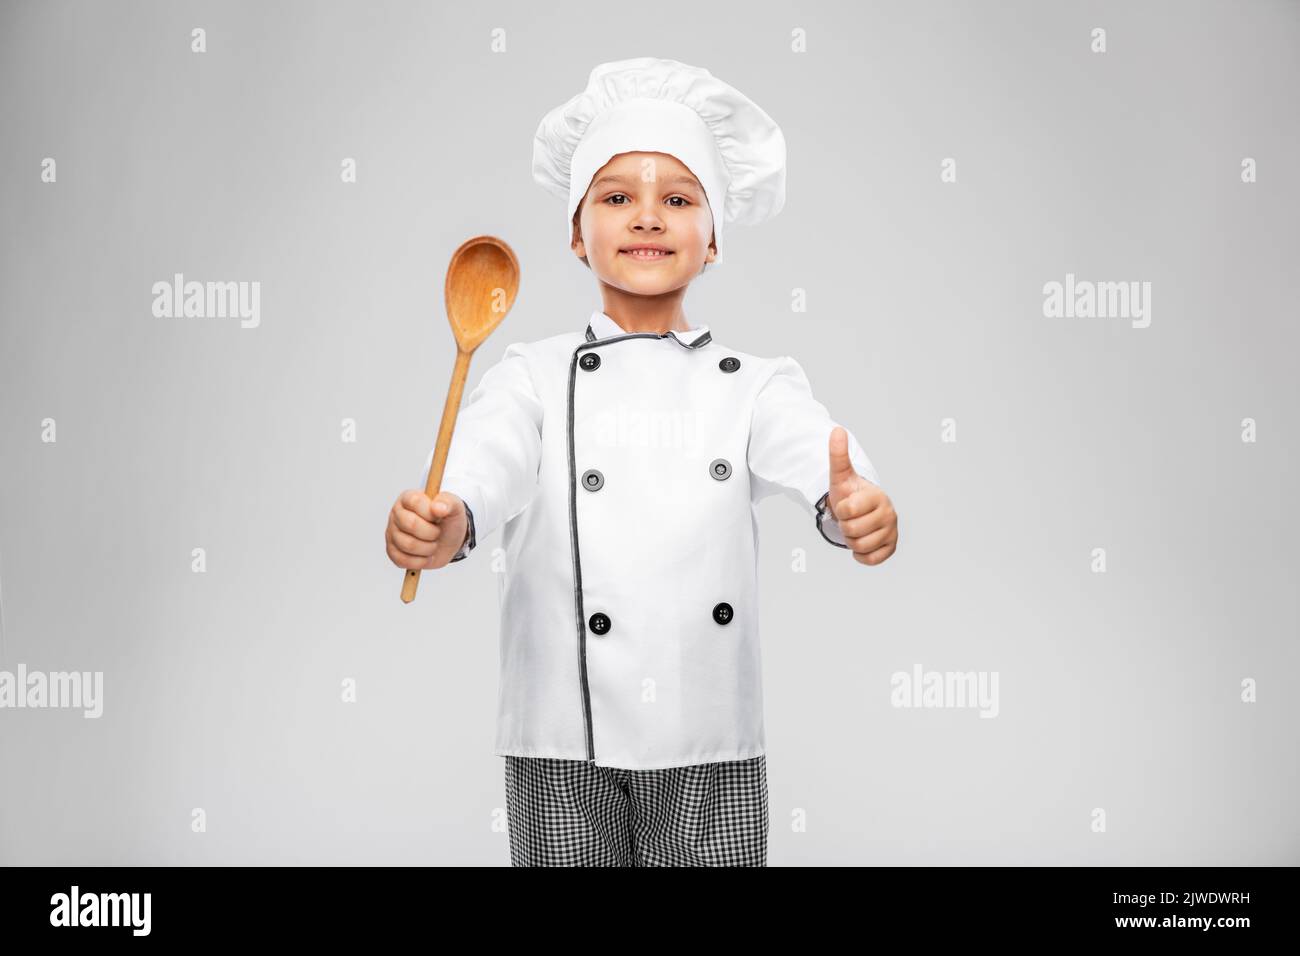 girl in chef's toque with spoon showing thumbs up Stock Photo